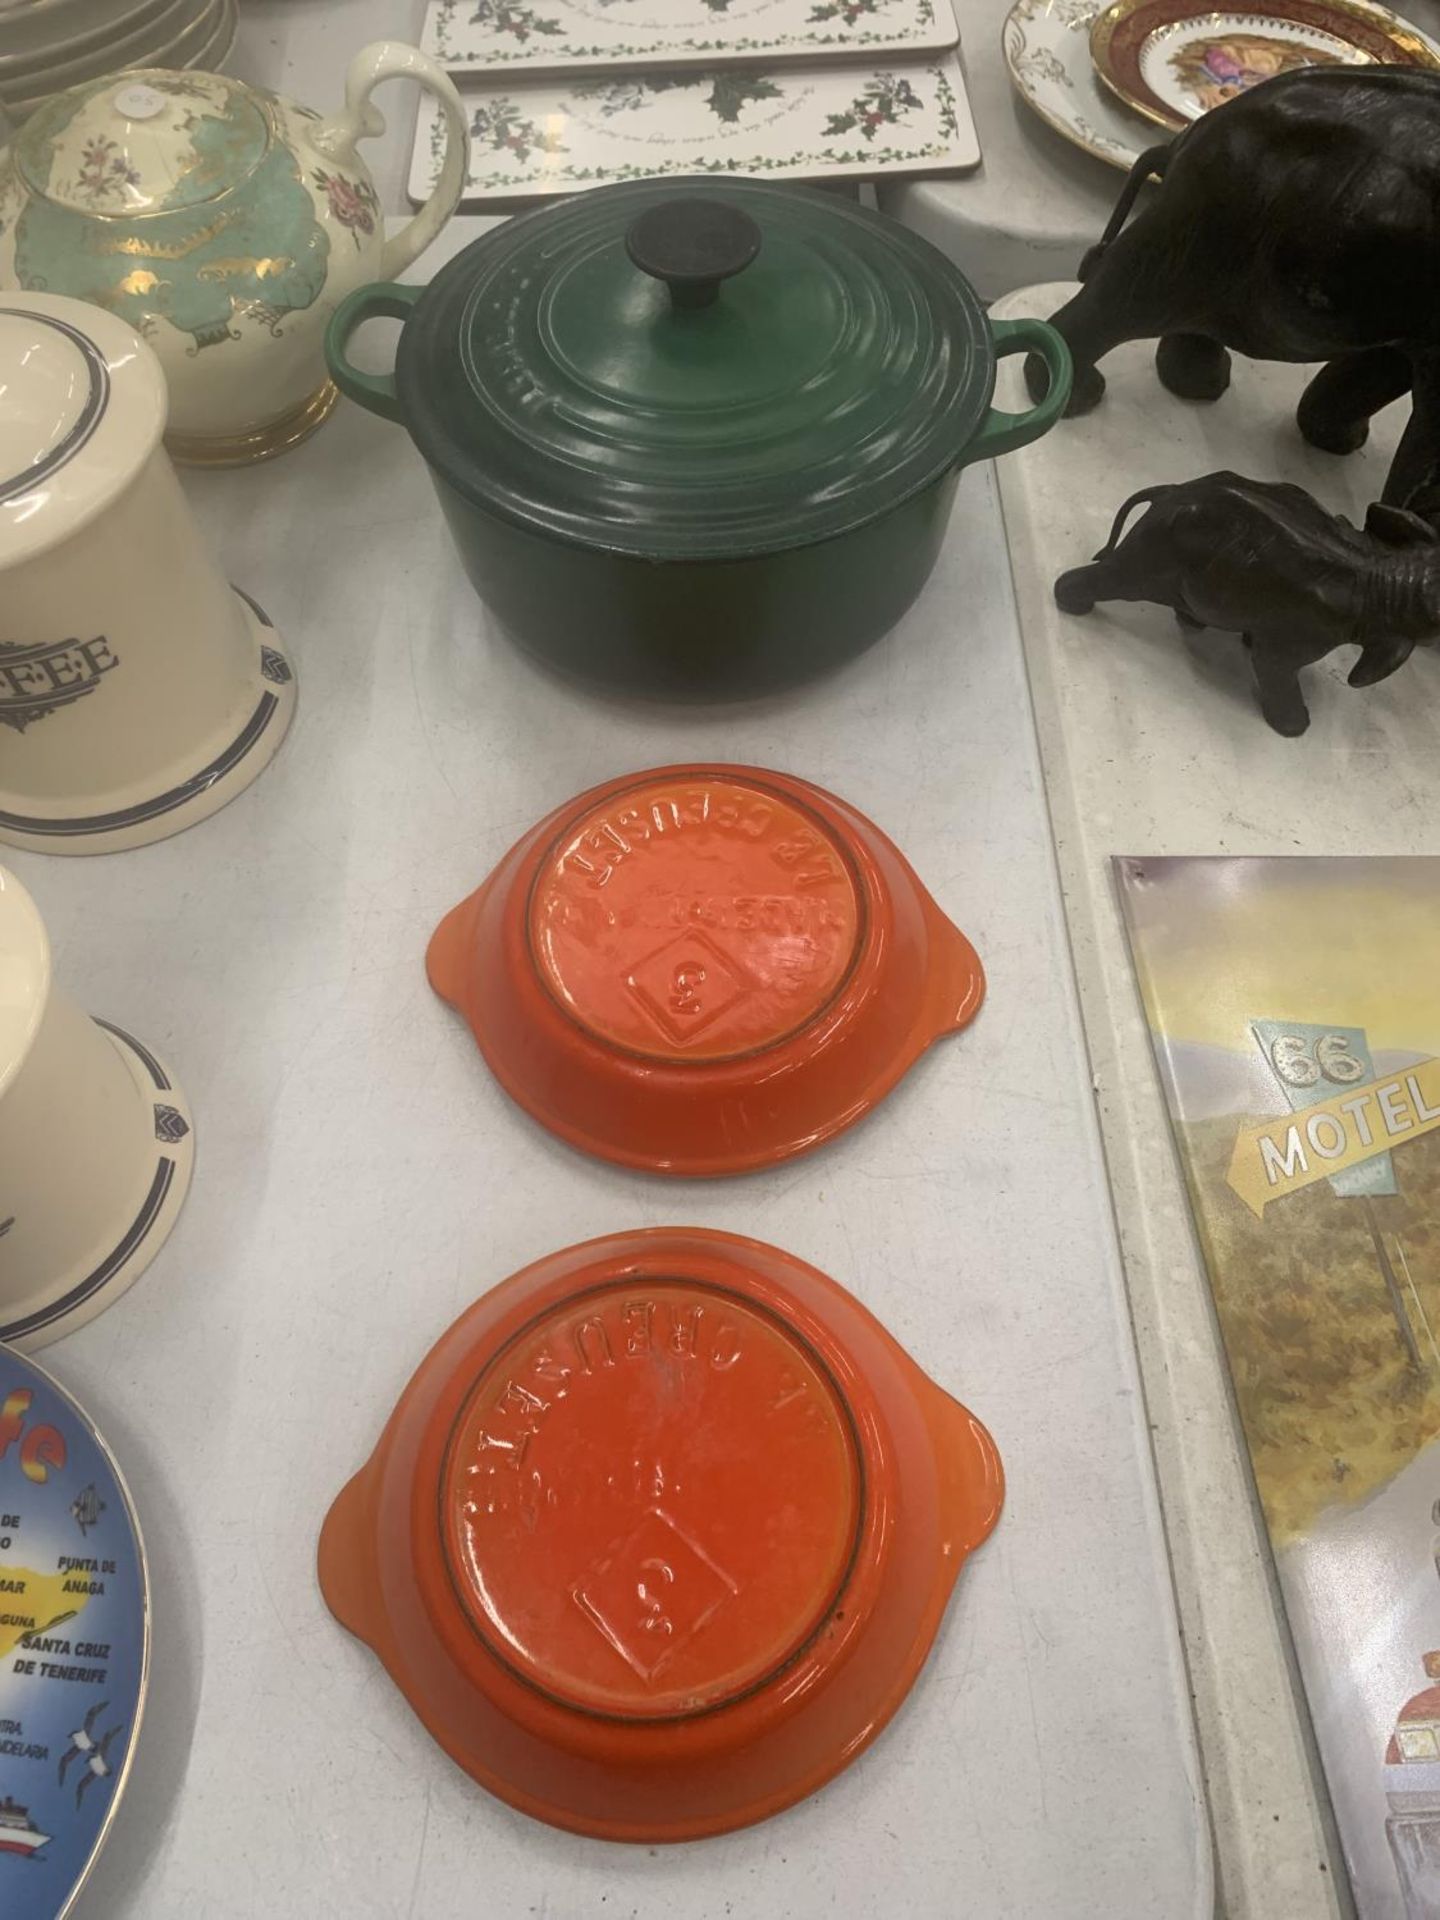 THREE LE CREUSET ITEMS TO INCLUDE A CASSEROLE DISH AND TWO PIE DISHES